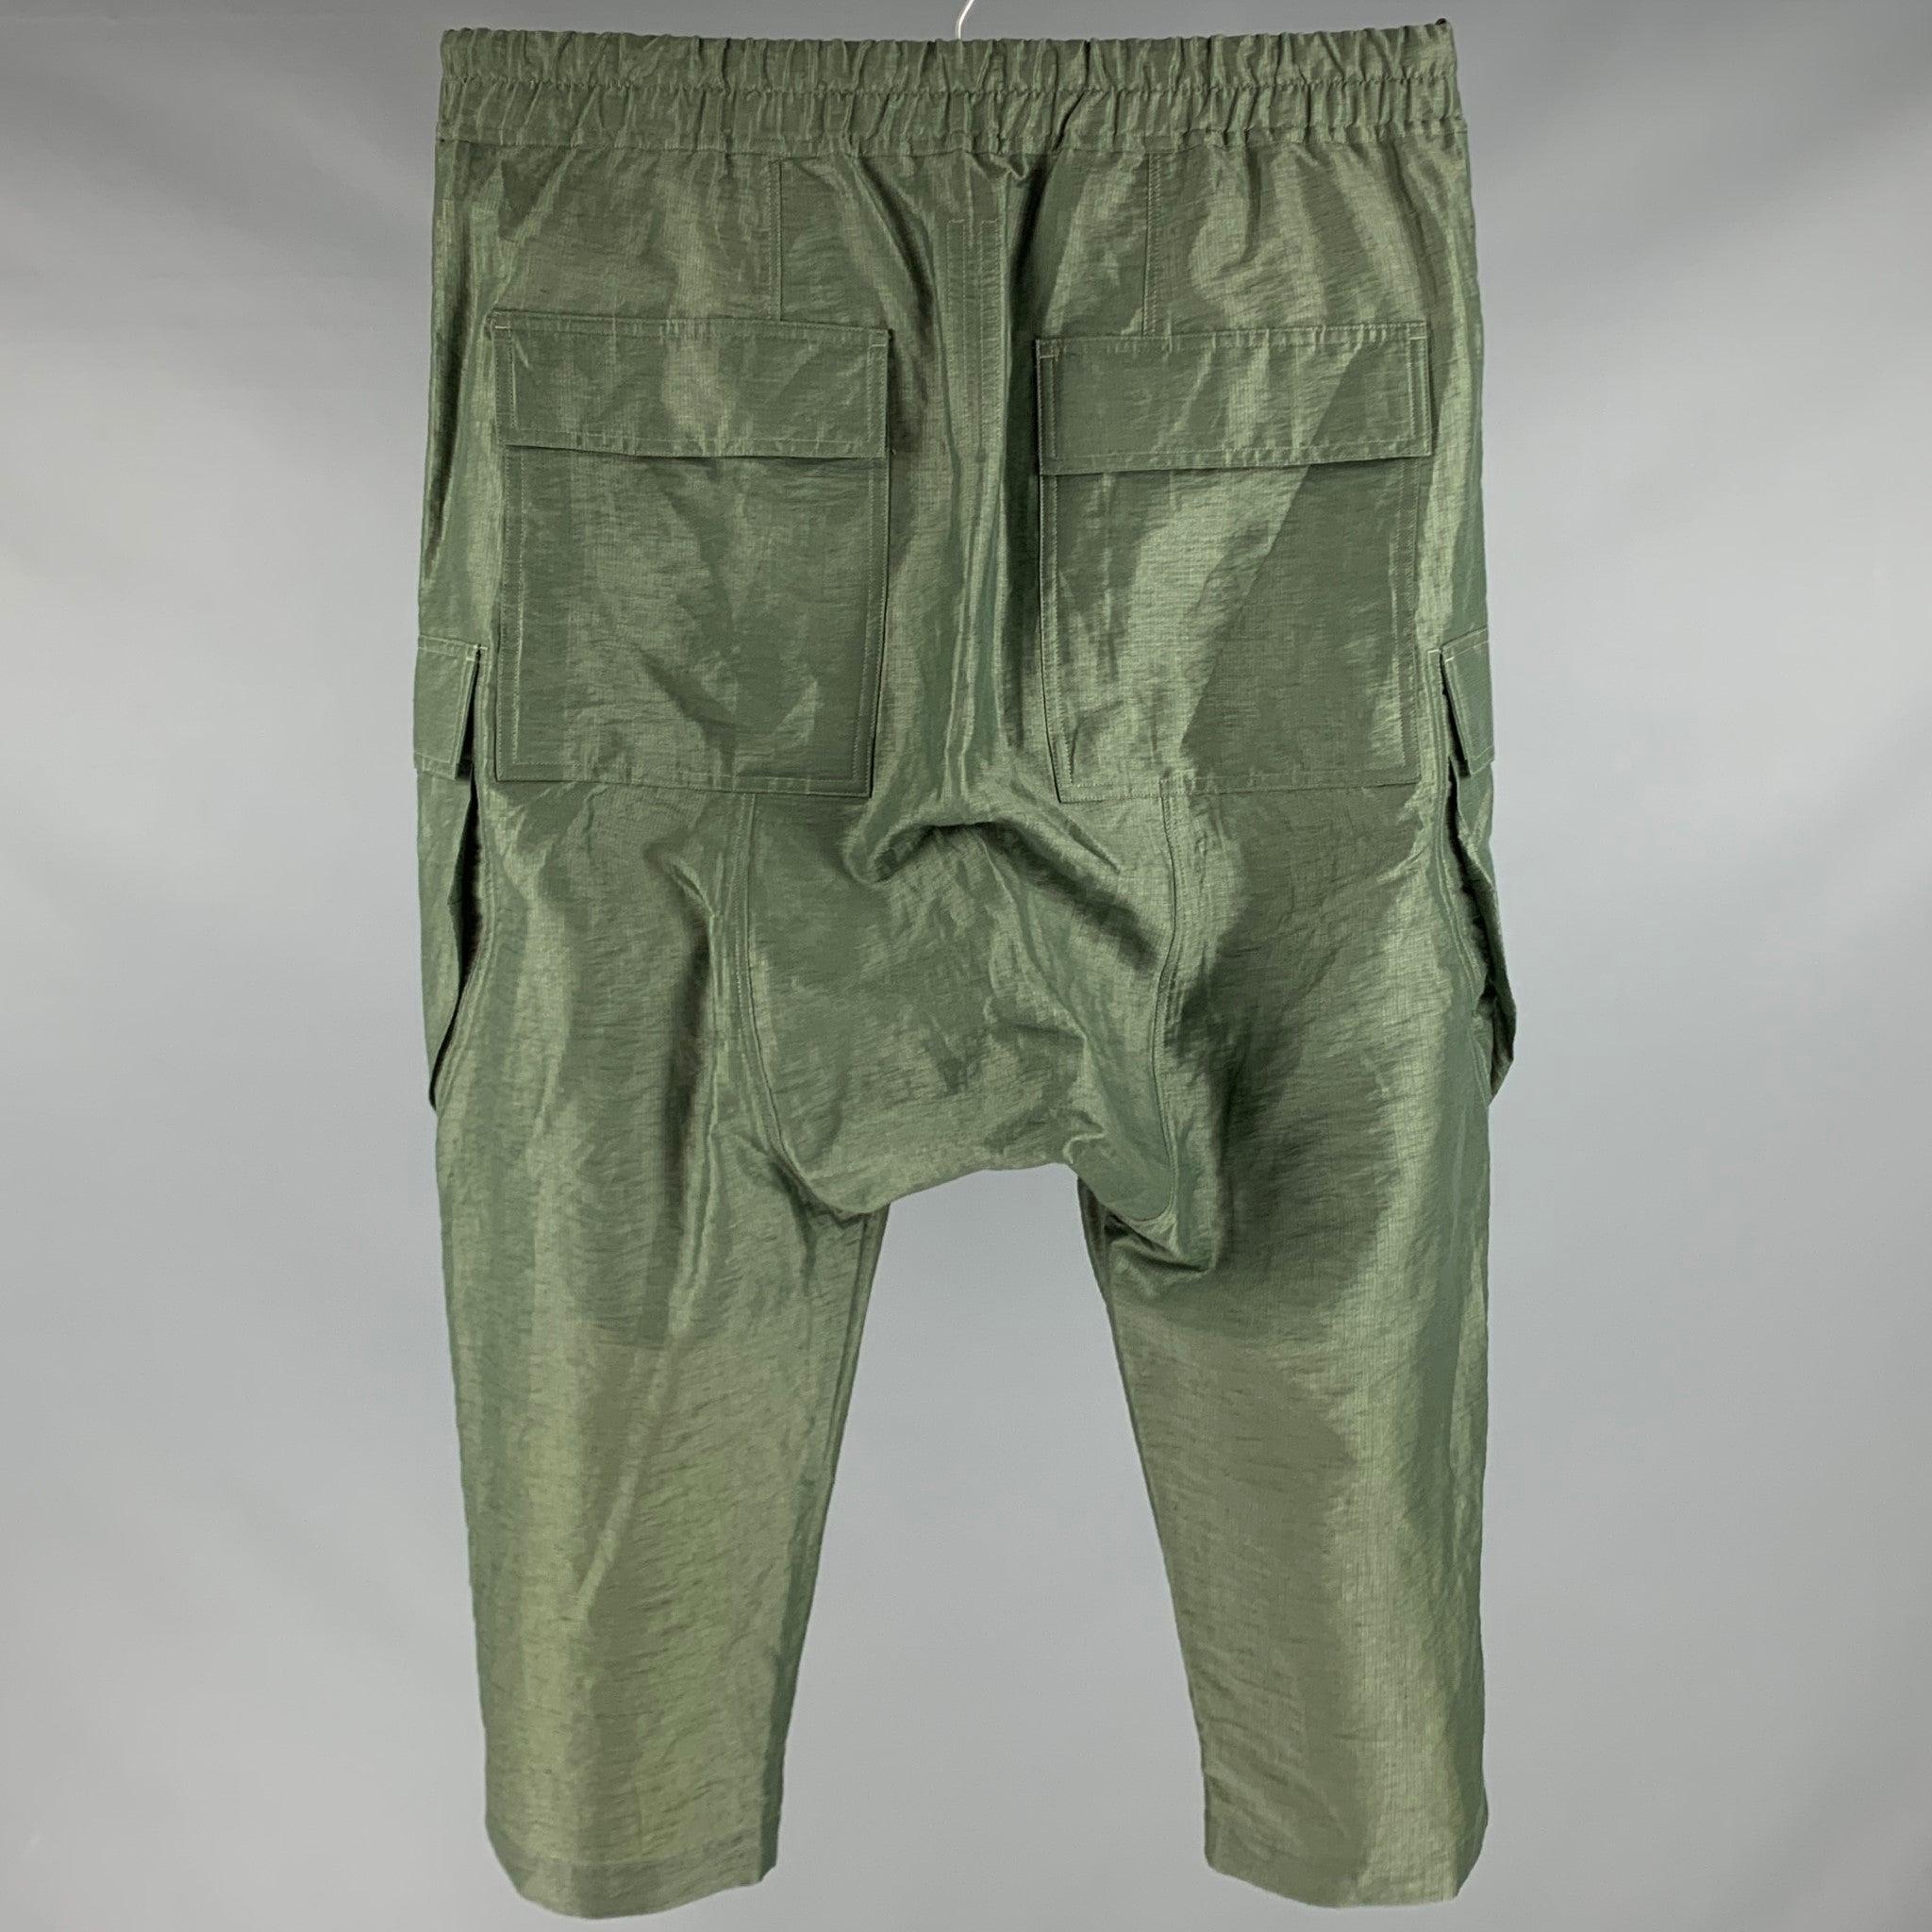 RICK OWENS SS 2023 casual pants
in a moss green linen nylon blend fabric featuring a drop-crotch style, large pockets, drawstring waist, and a button fly closure. Made in Italy.Very Good Pre-Owned Condition. Minor pilling. 

Marked:   IT 50